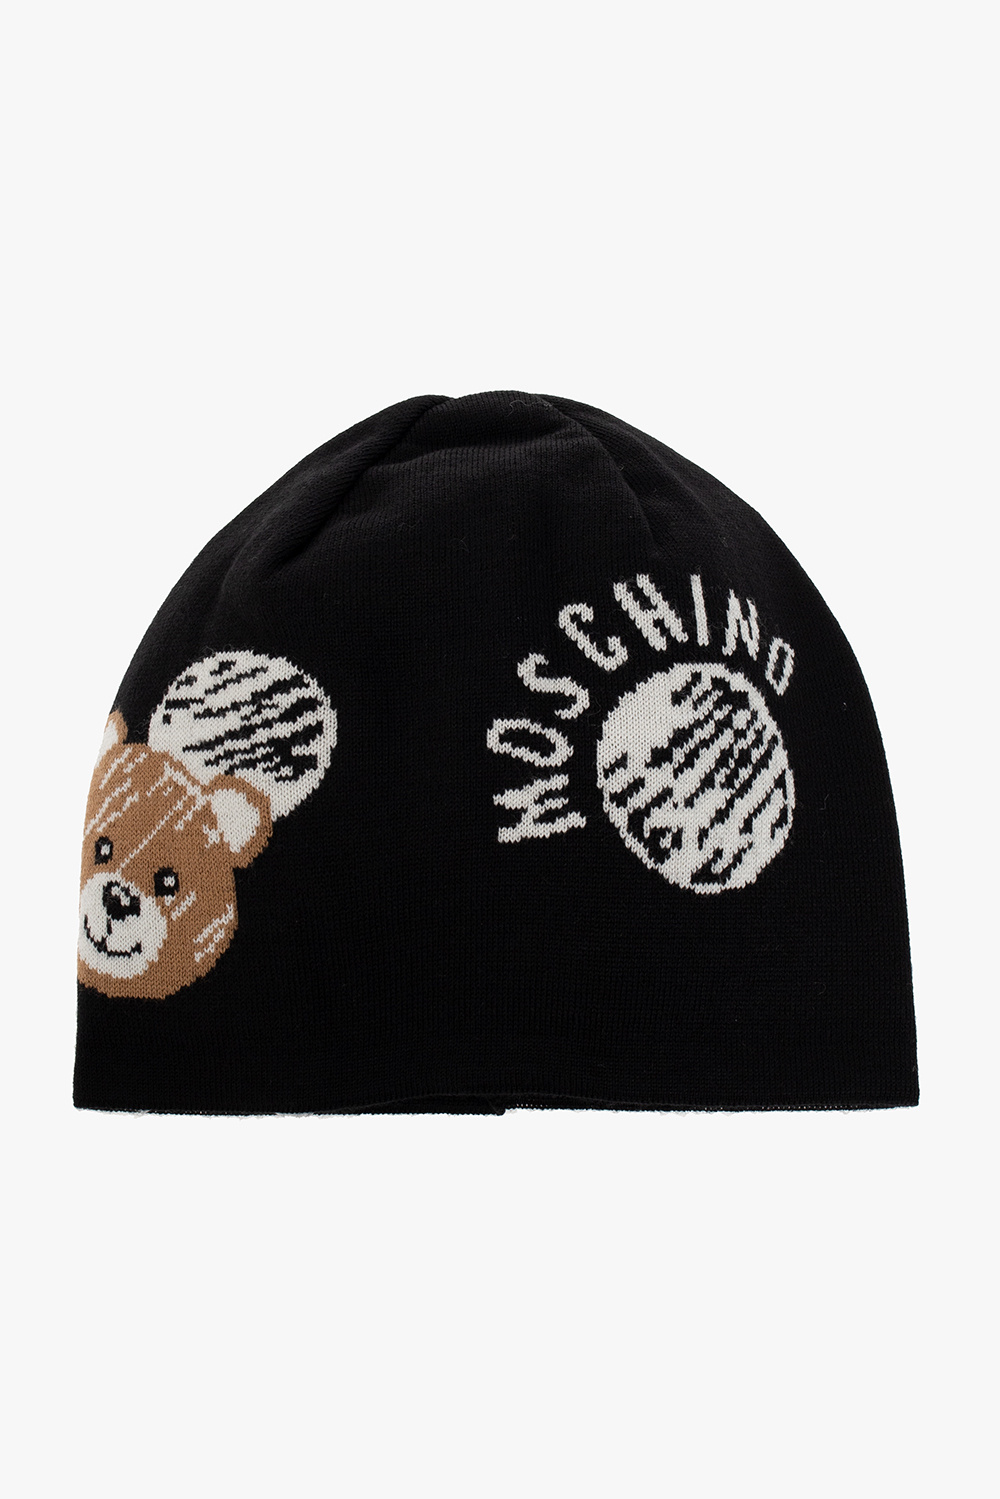 Moschino Kid hat in wool blend with jacquard Teddy